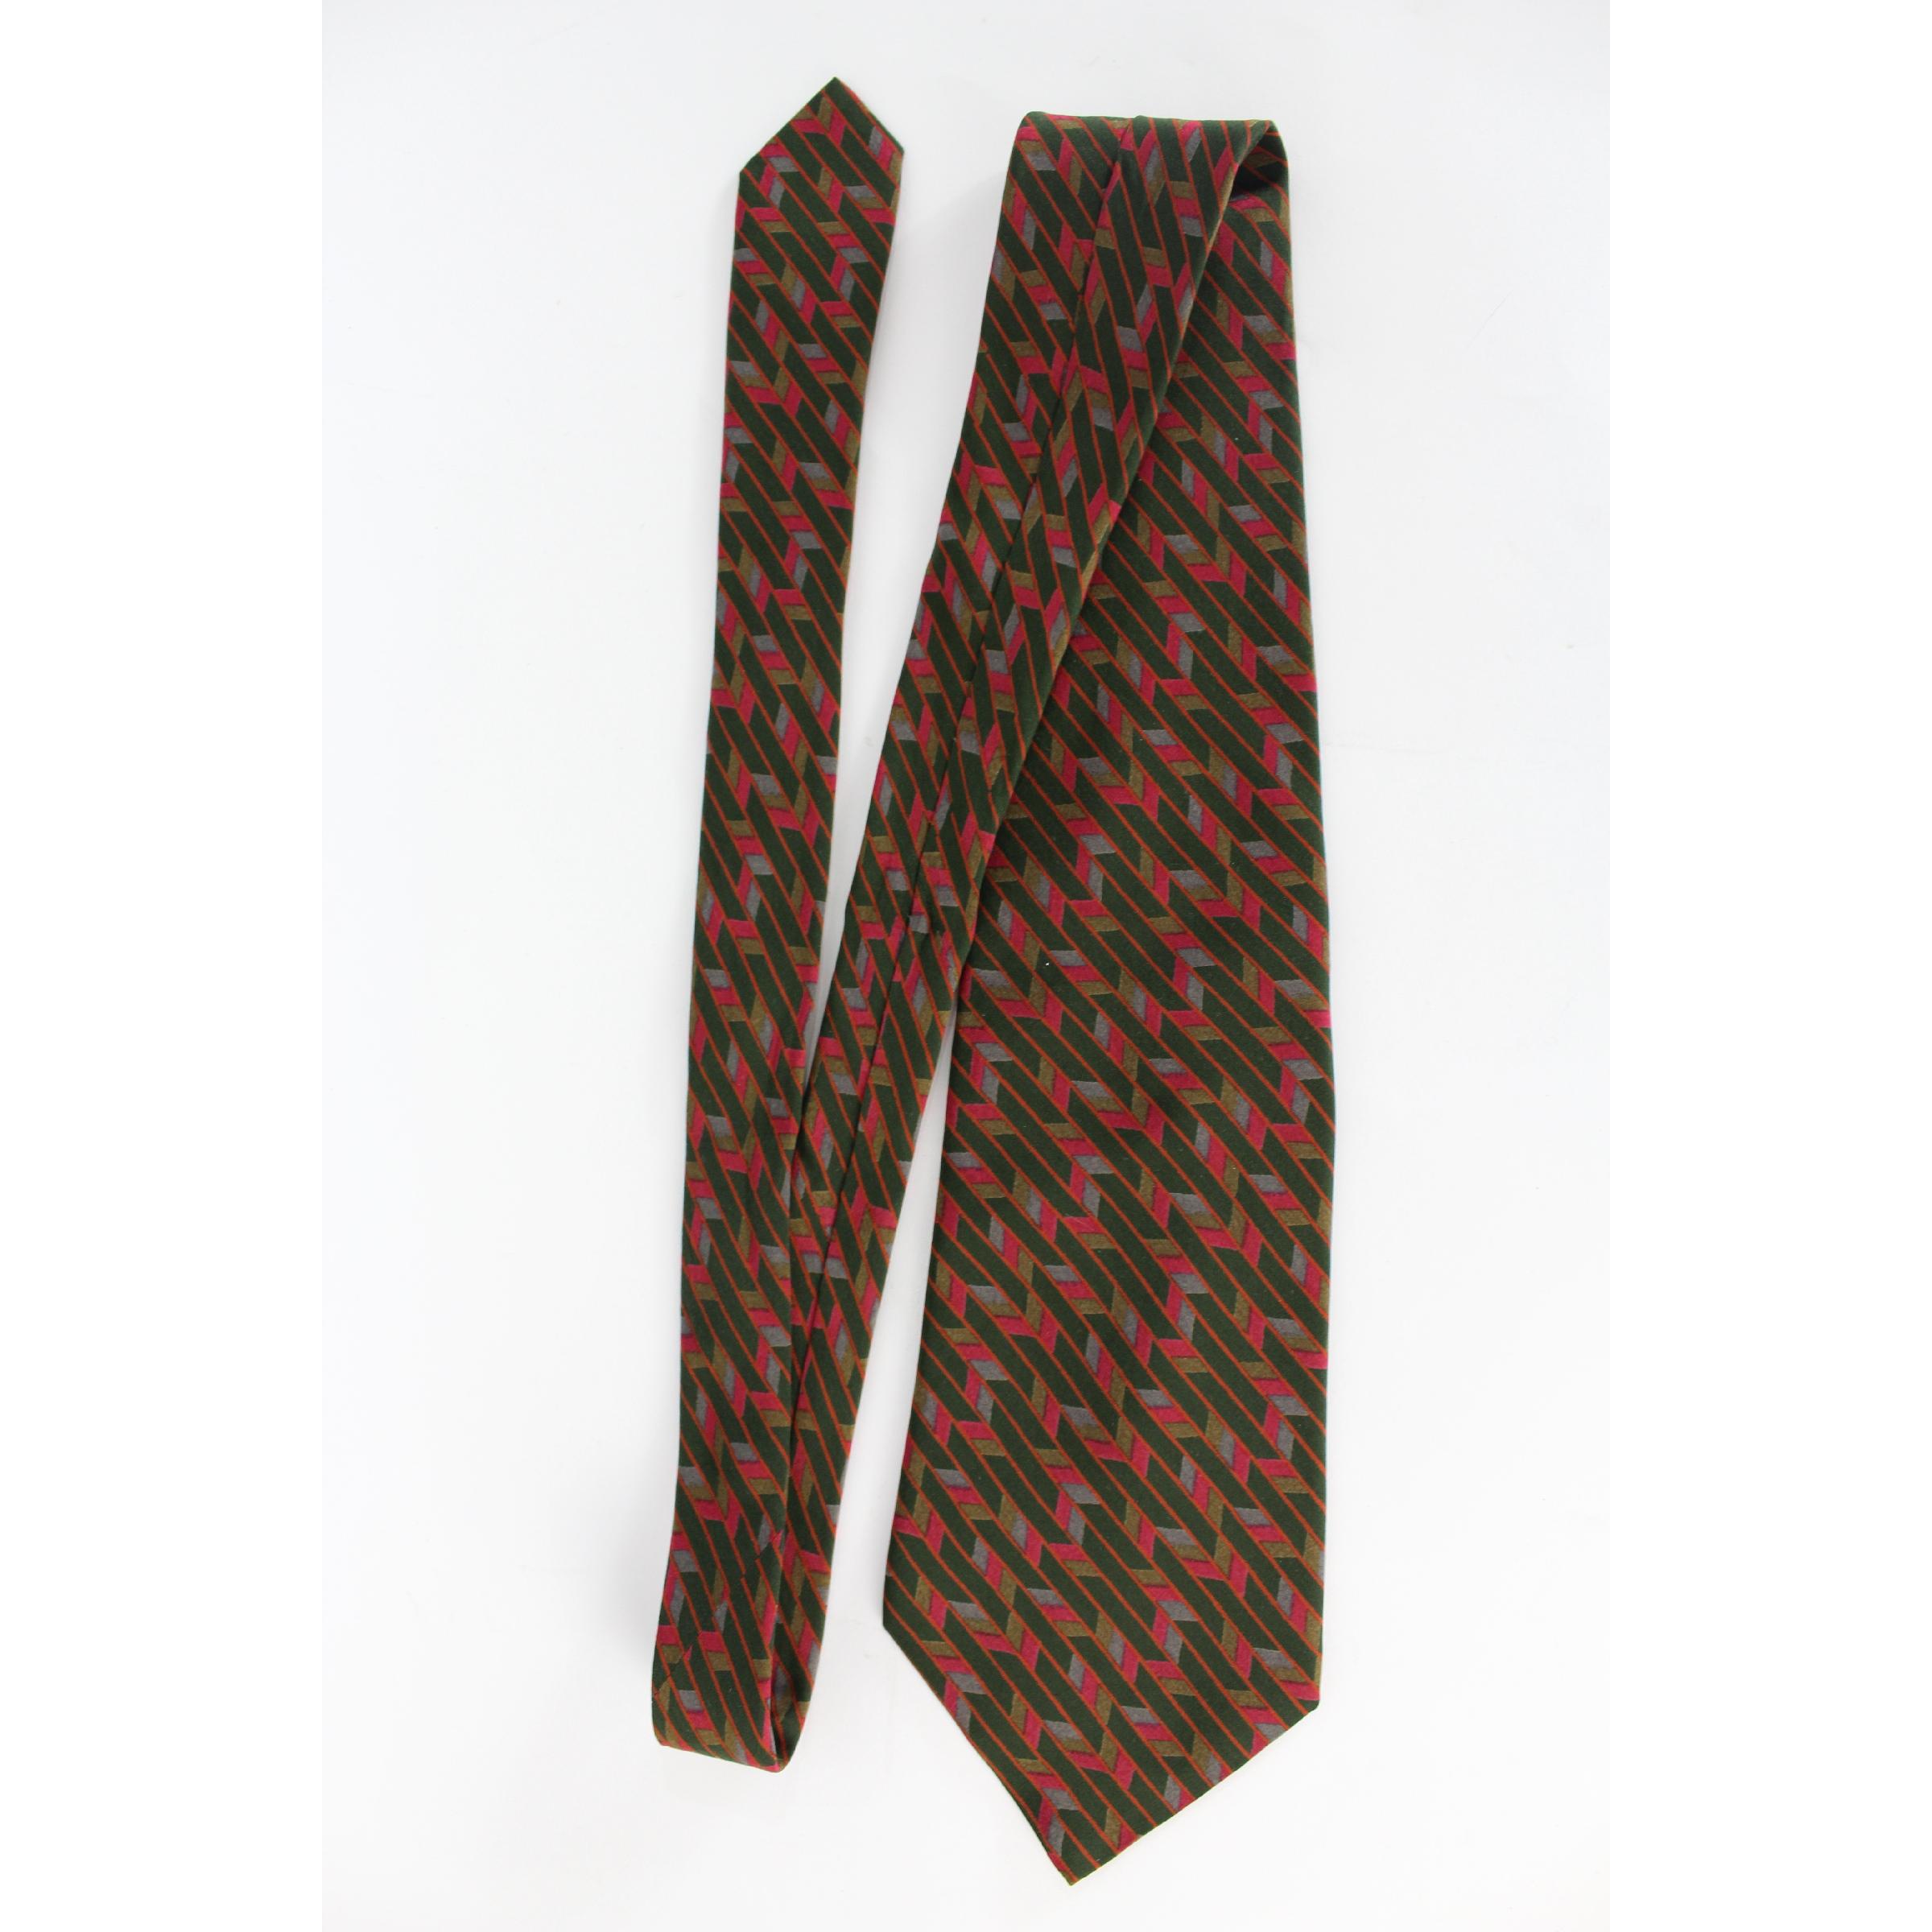 Yves Saint Laurent vintage tie, 100% silk, geometric designs in red, orange and green. 1990s. Made in Italy. Excellent conditions.

Length: 136 cm

Width: 11 cm